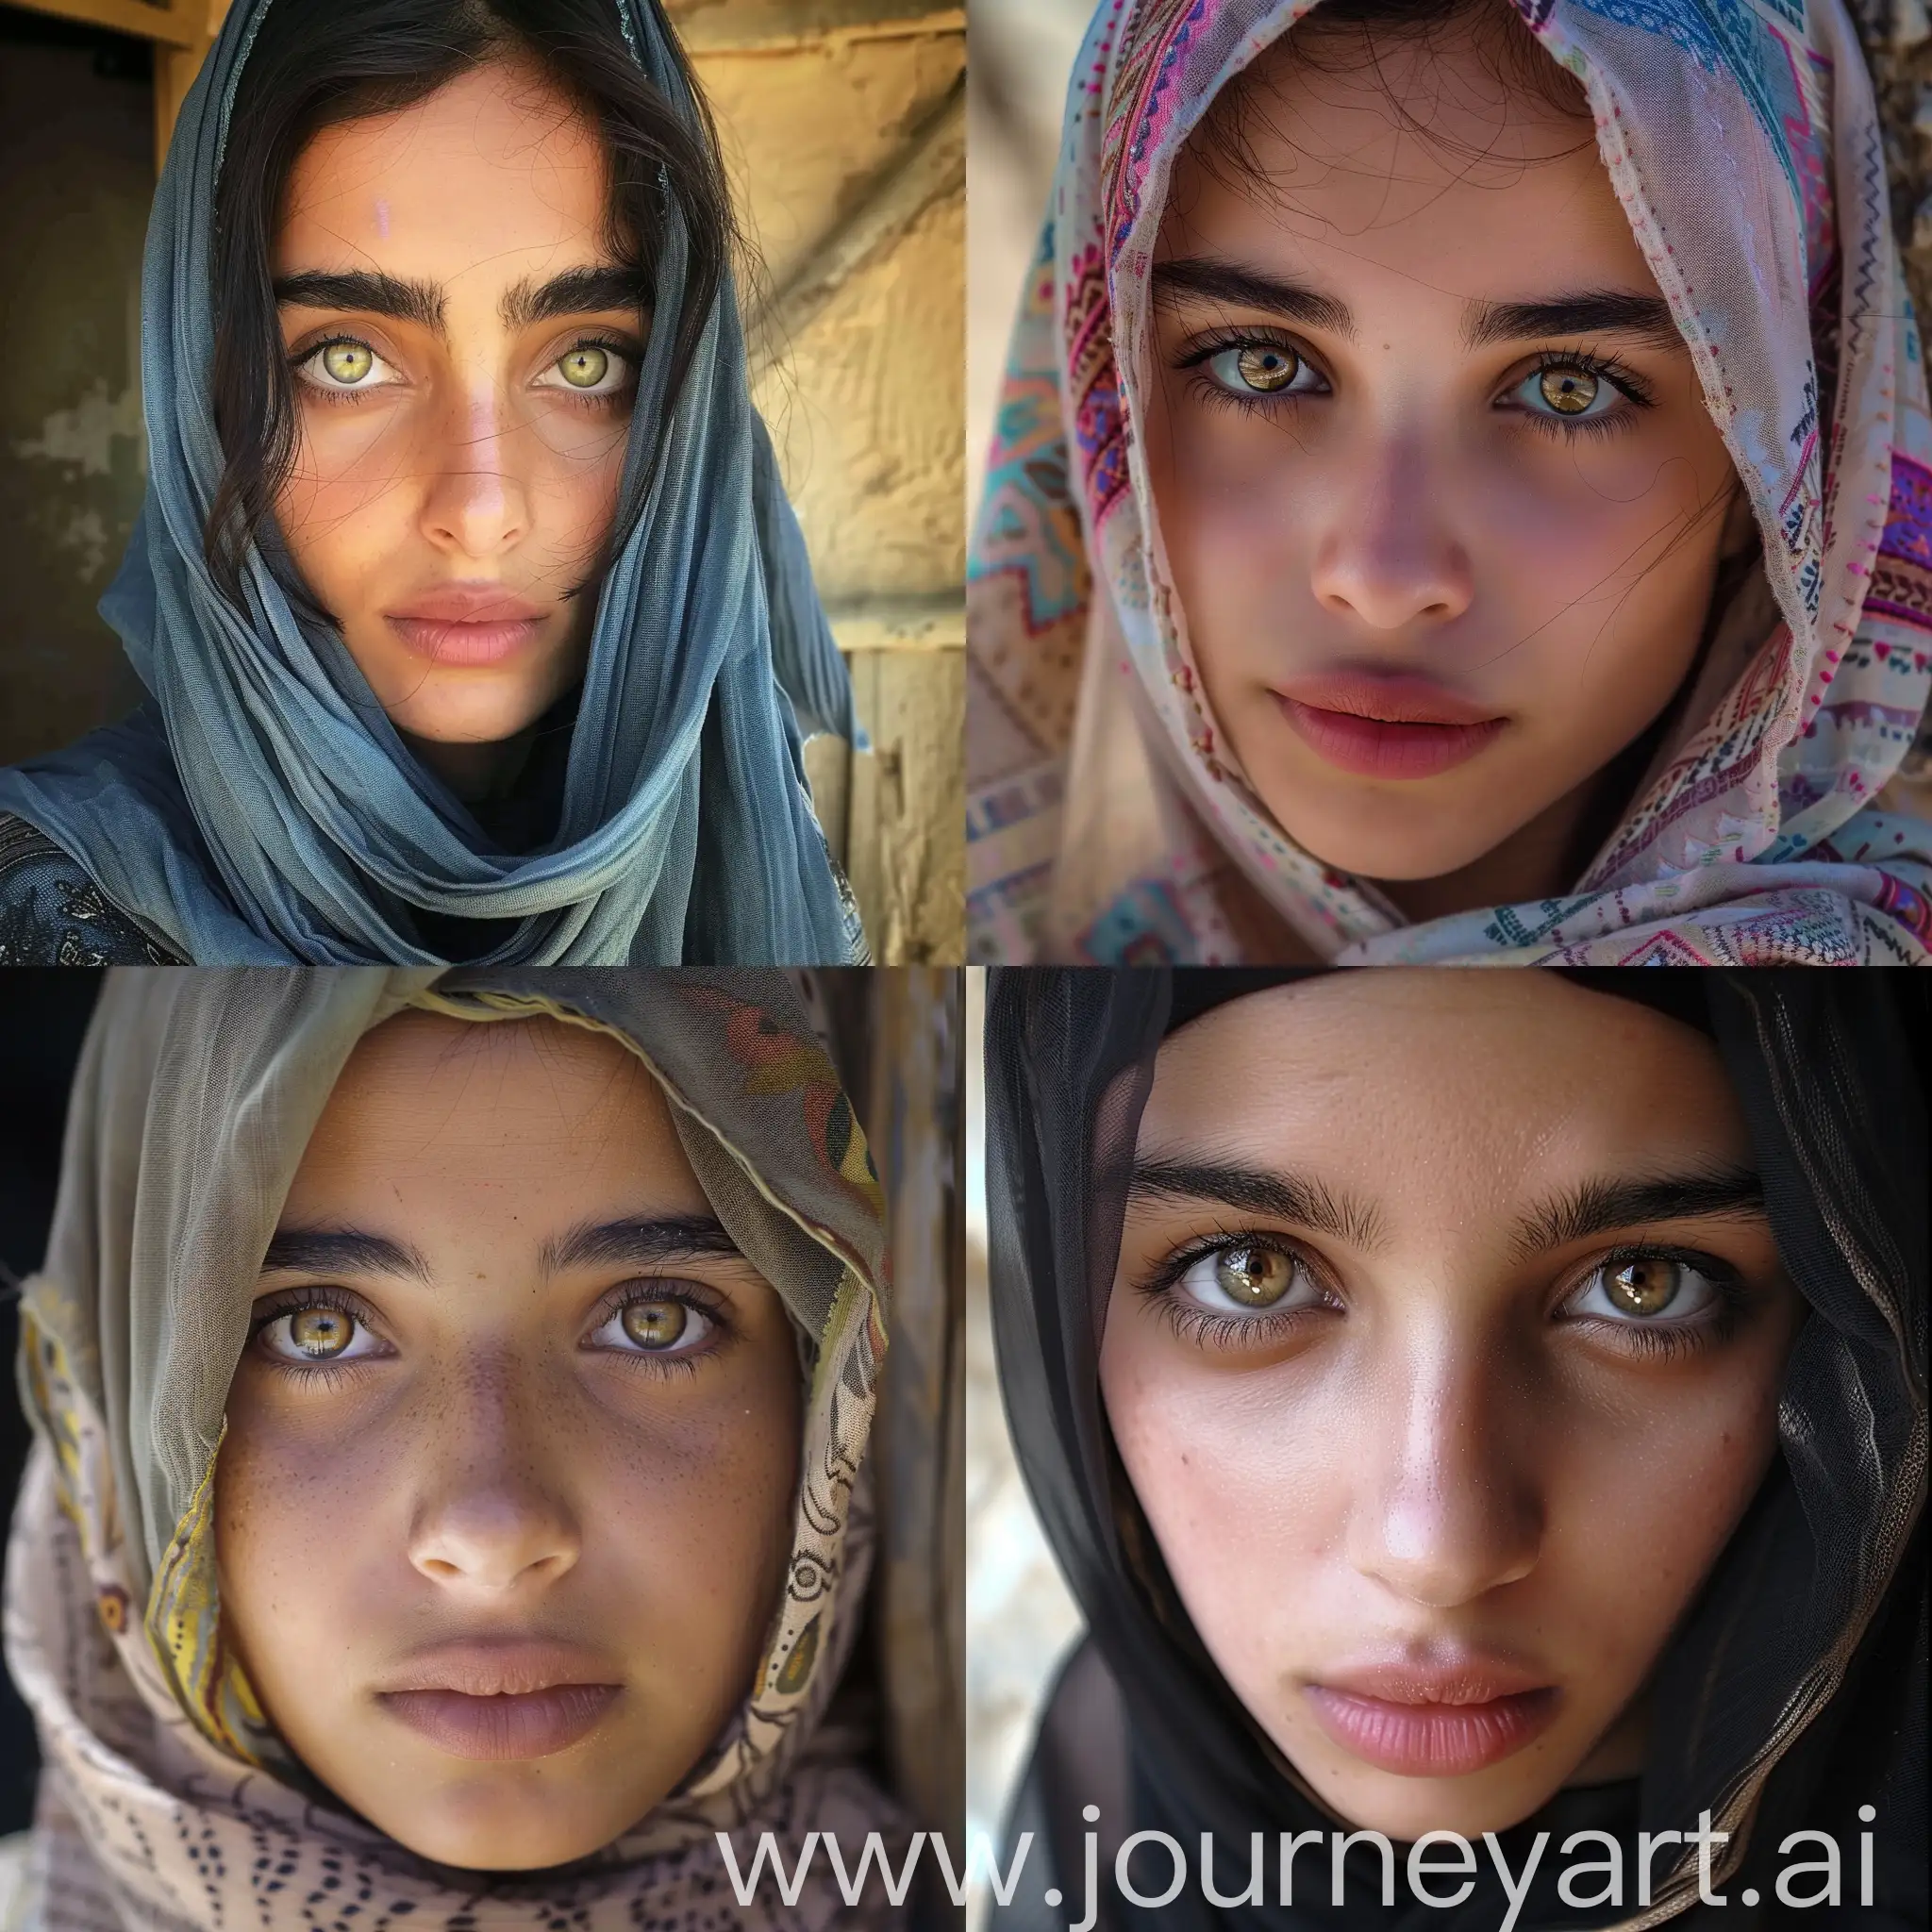 A beautiful innocent girl from Egypt with beautiful eyes